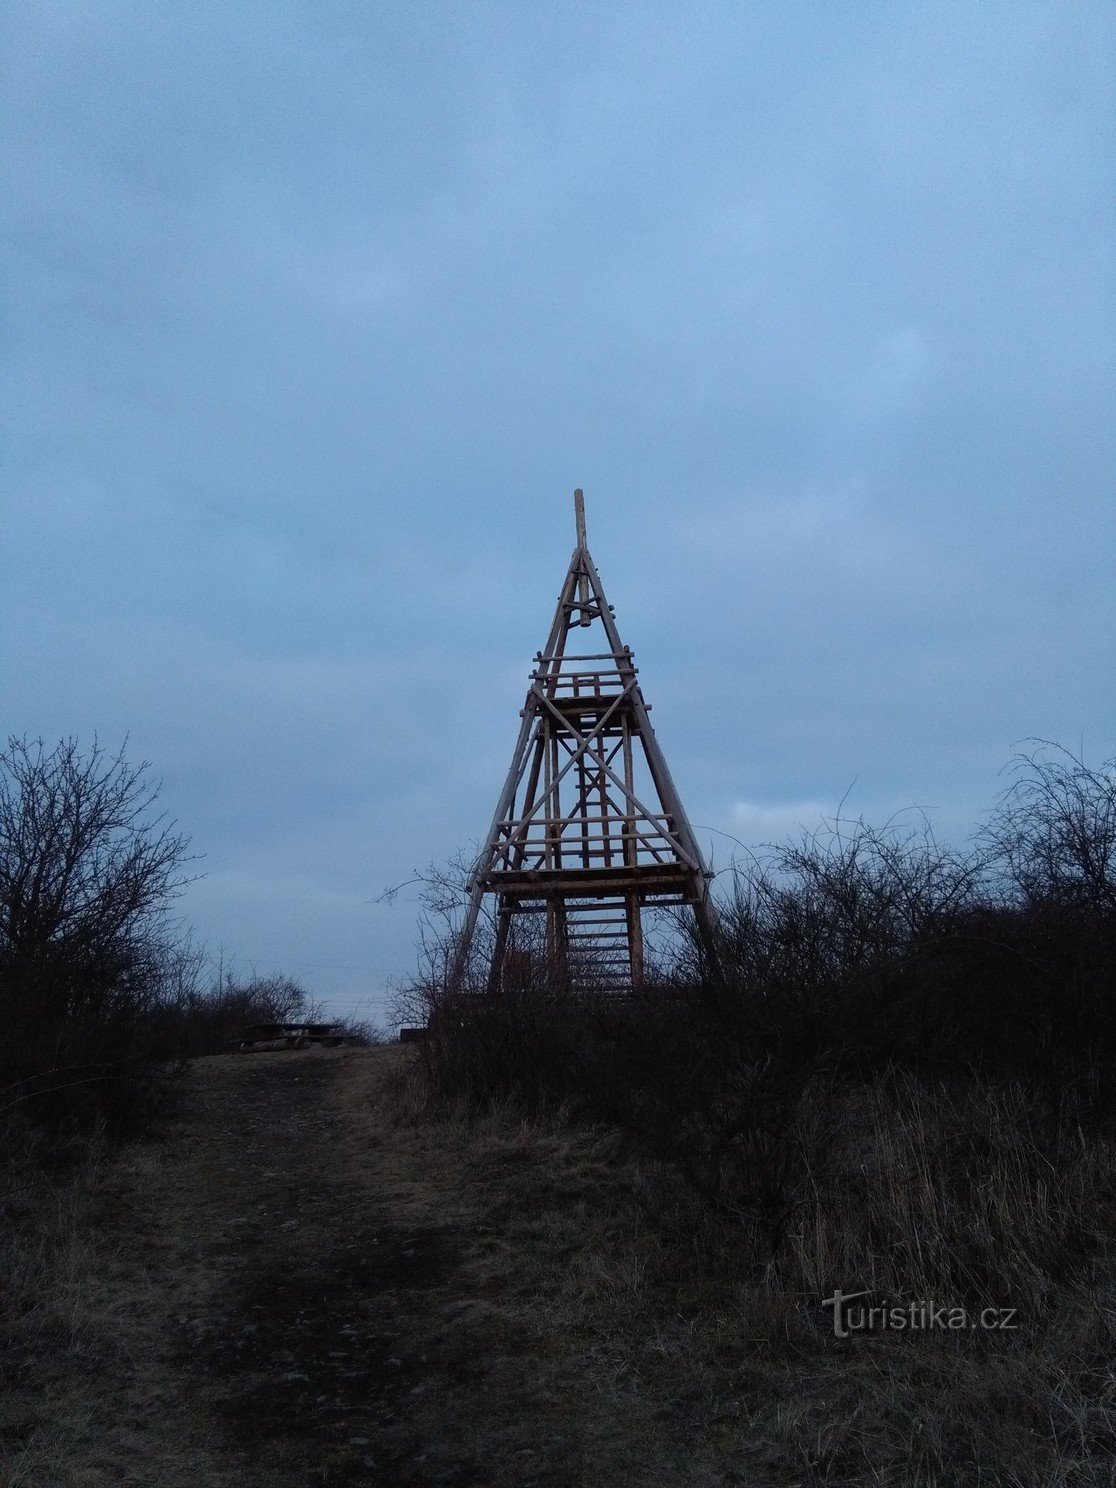 Veselov lookout tower – small but nice